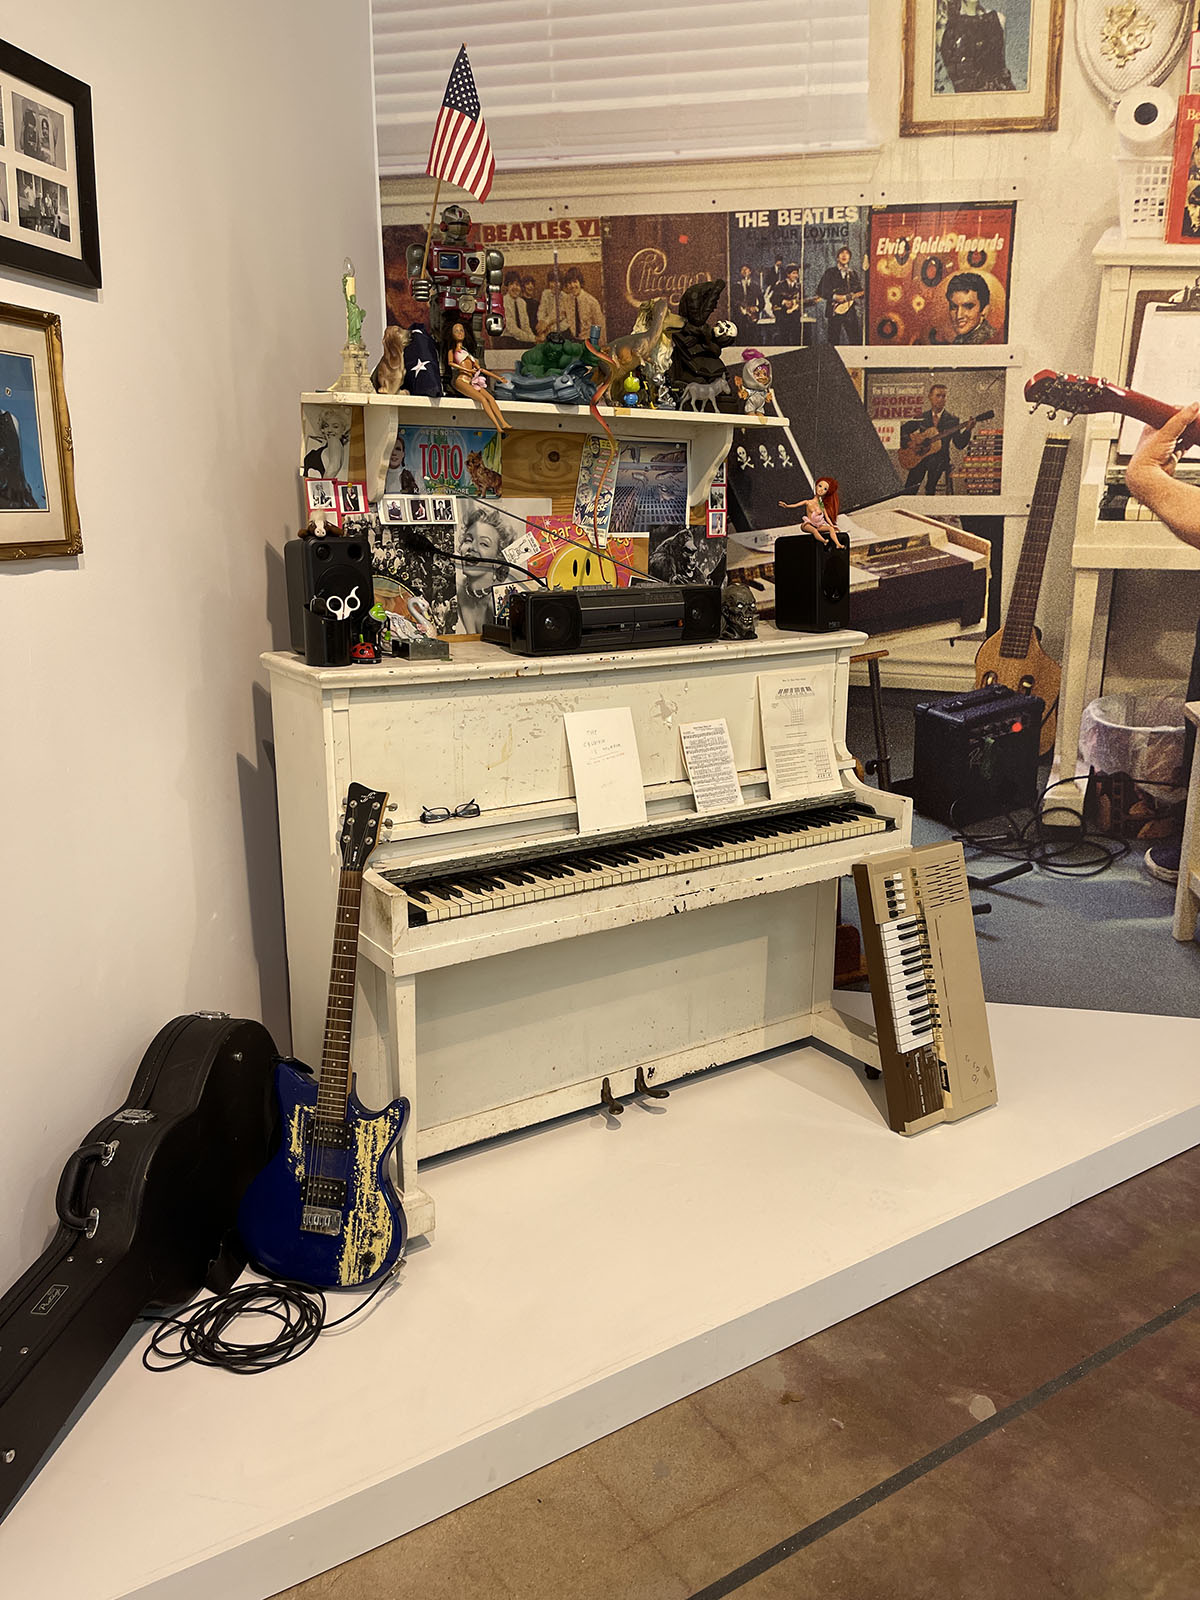 A piano, guitars, and other decorations in a museum exhibit